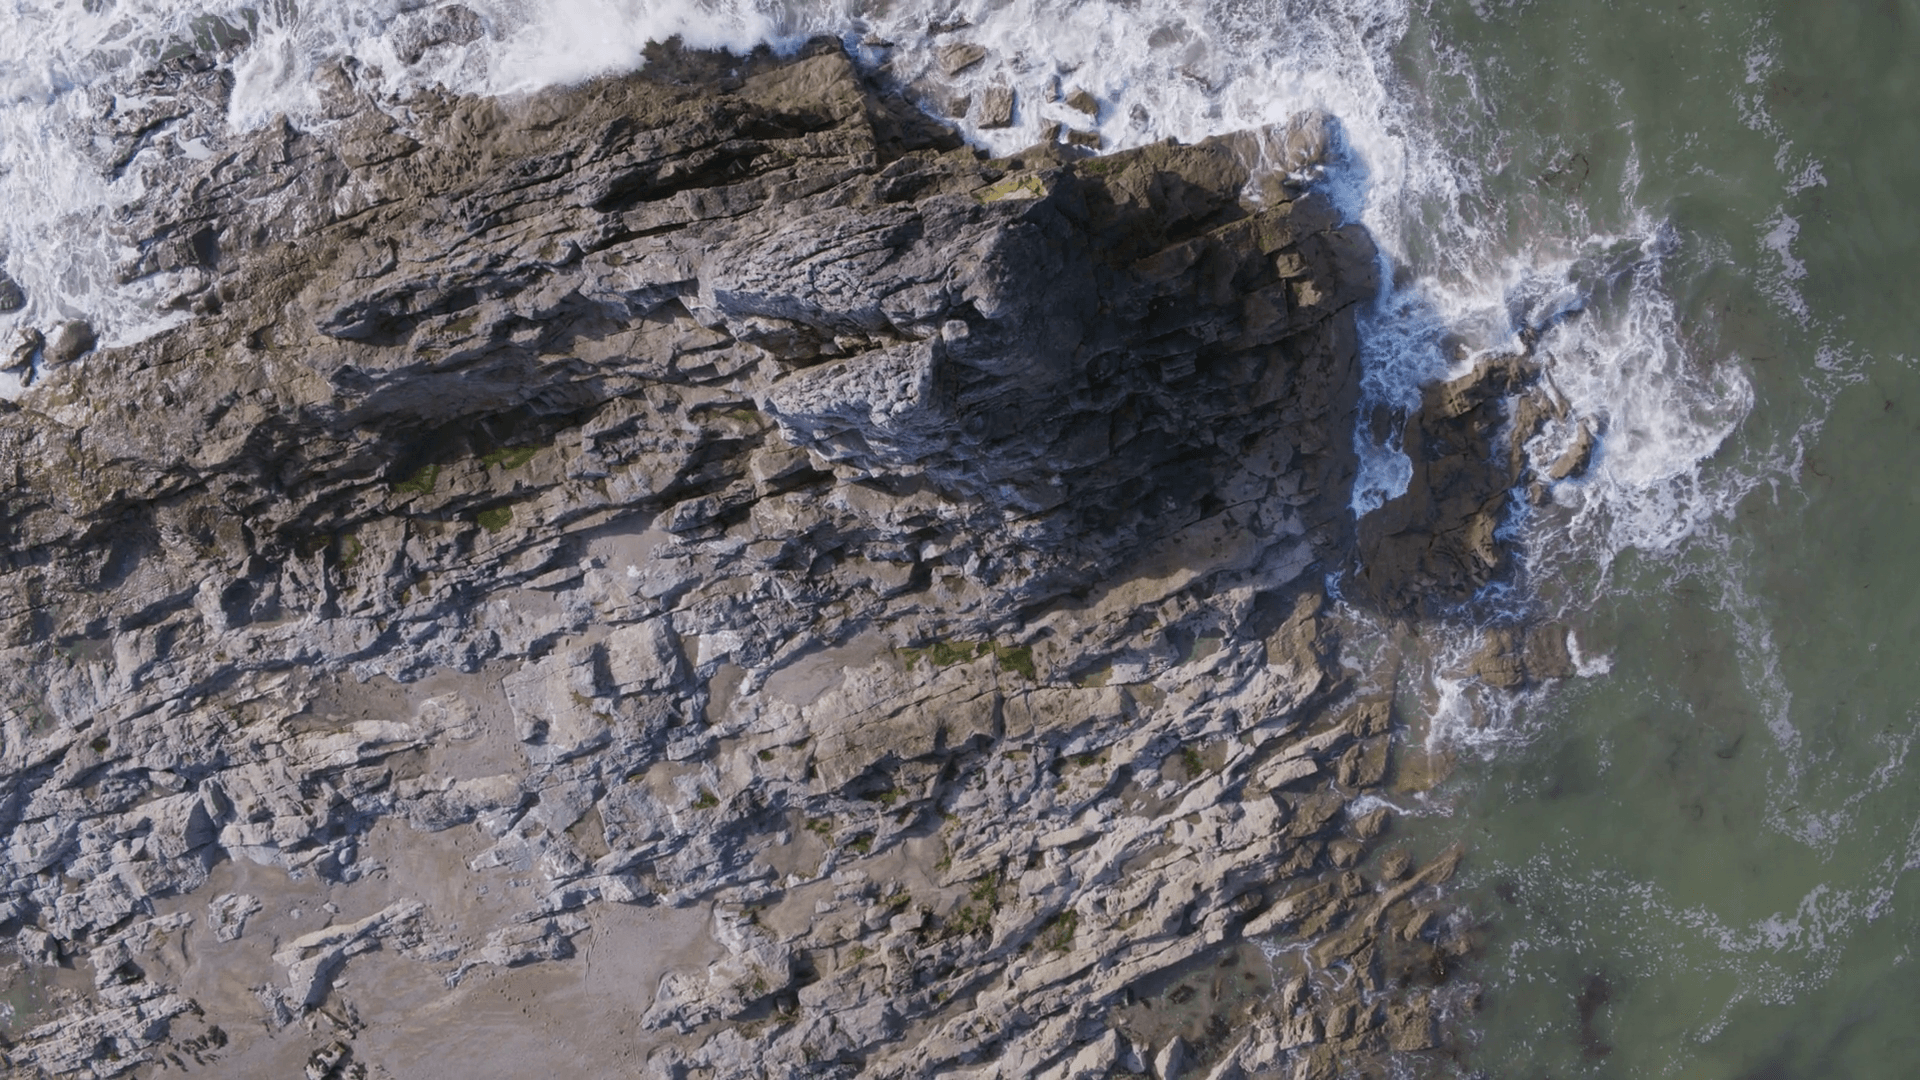 Aerial drone footage of rock formation at beach. Scenic view of sea waves breaking on rocky shore. The video is filmed from an overhead perspective